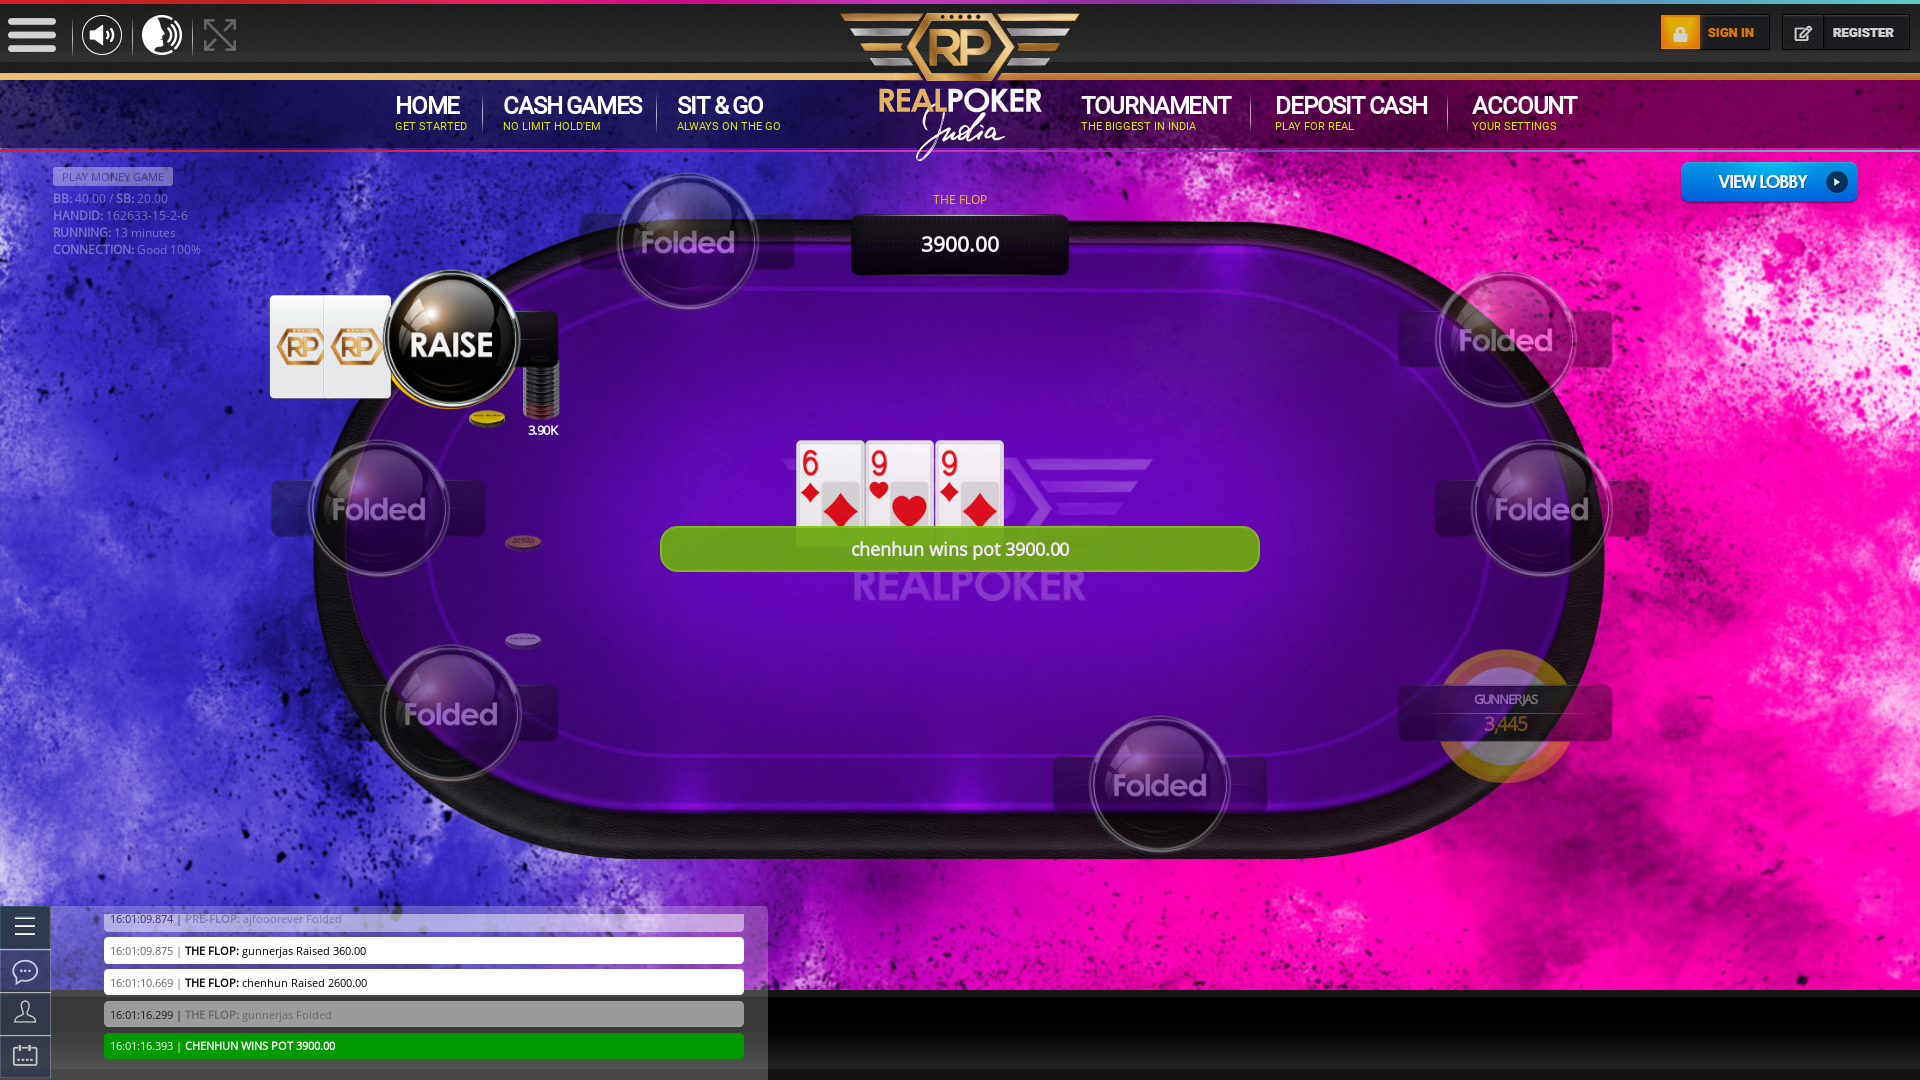 Bareilly Poker India from August